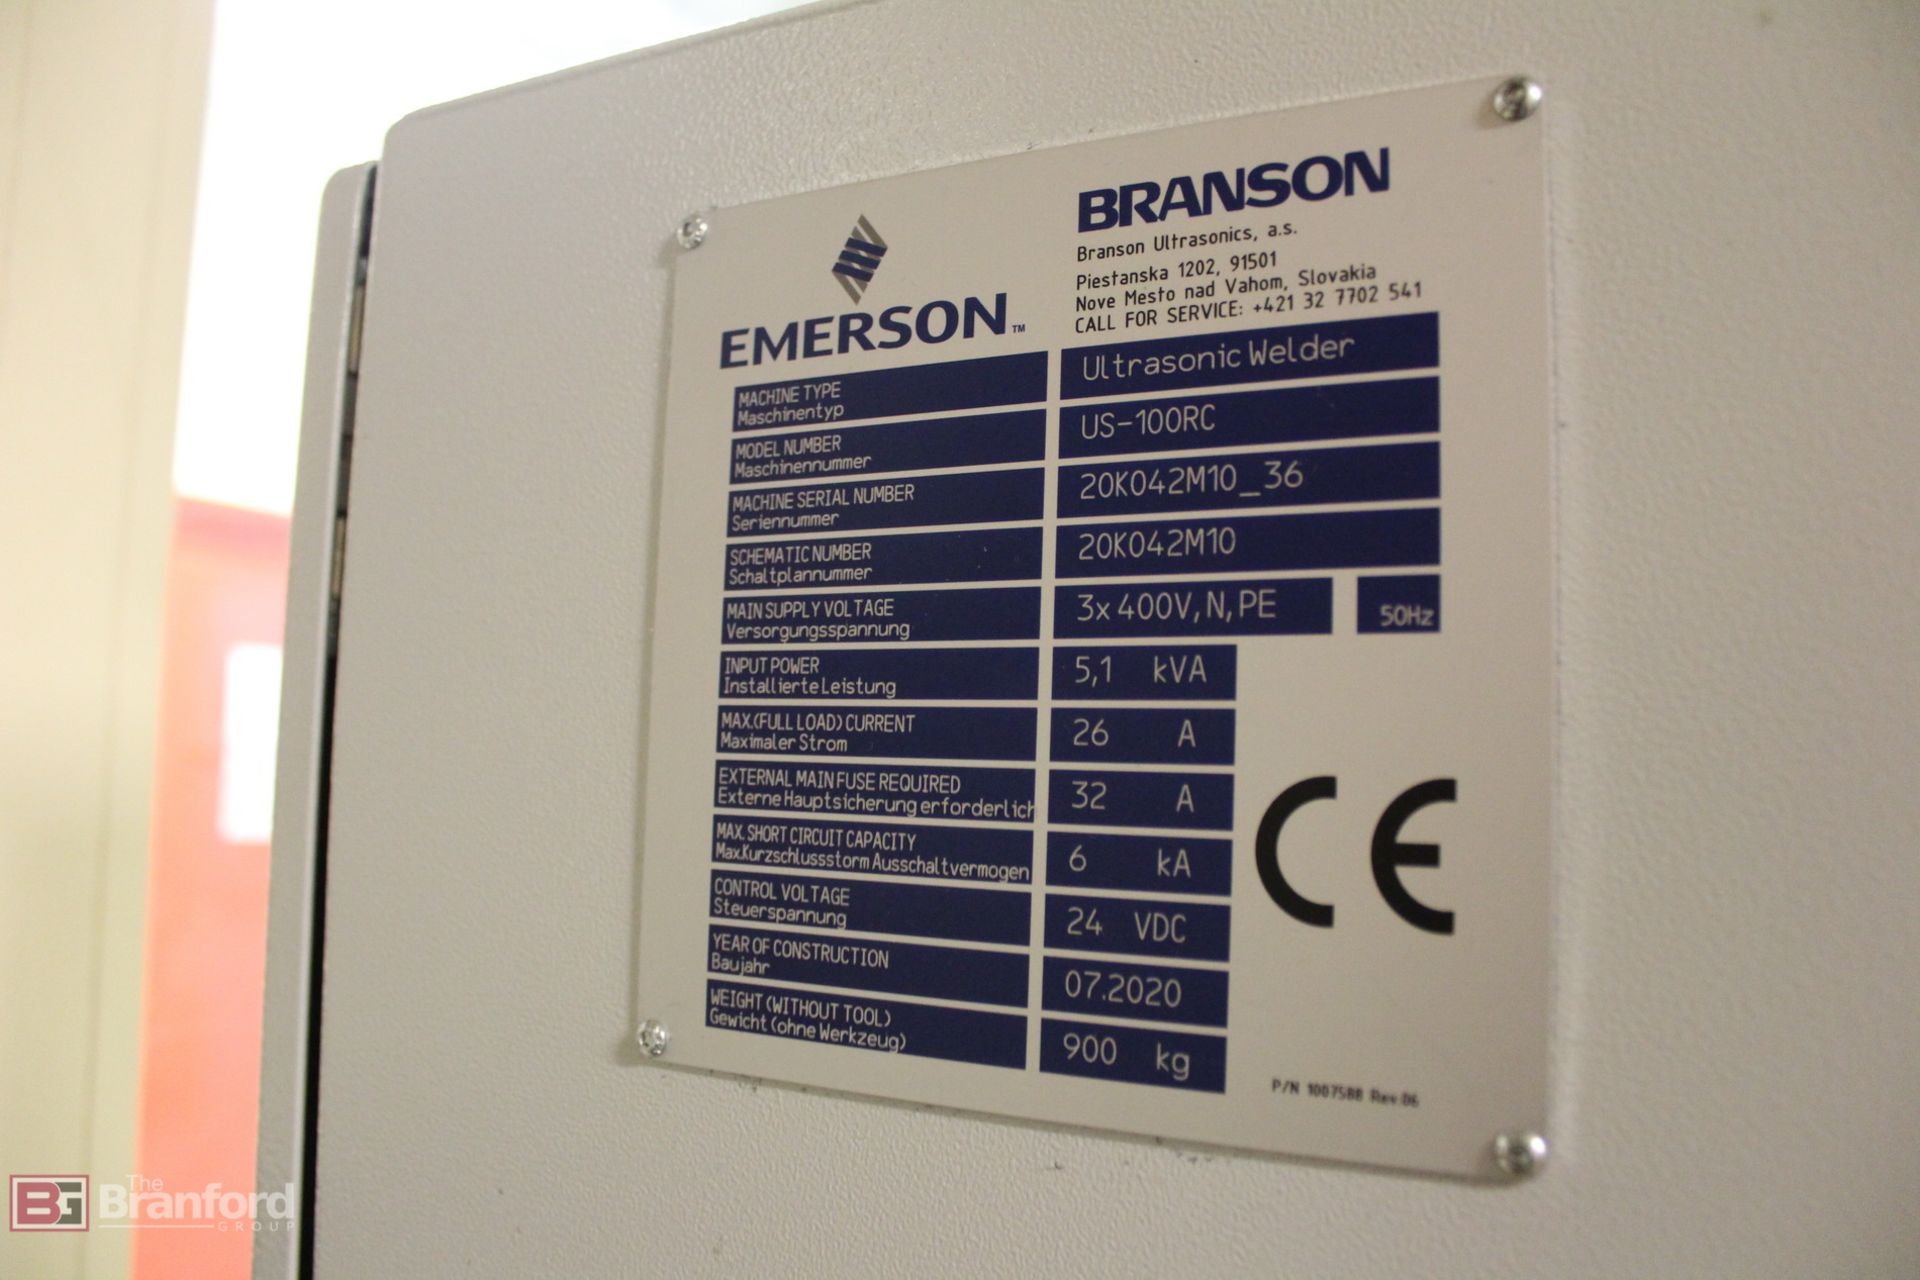 Emerson Branson US-100RC Ultrasonic Rotary Table Sealer/ Cutter - Image 3 of 3